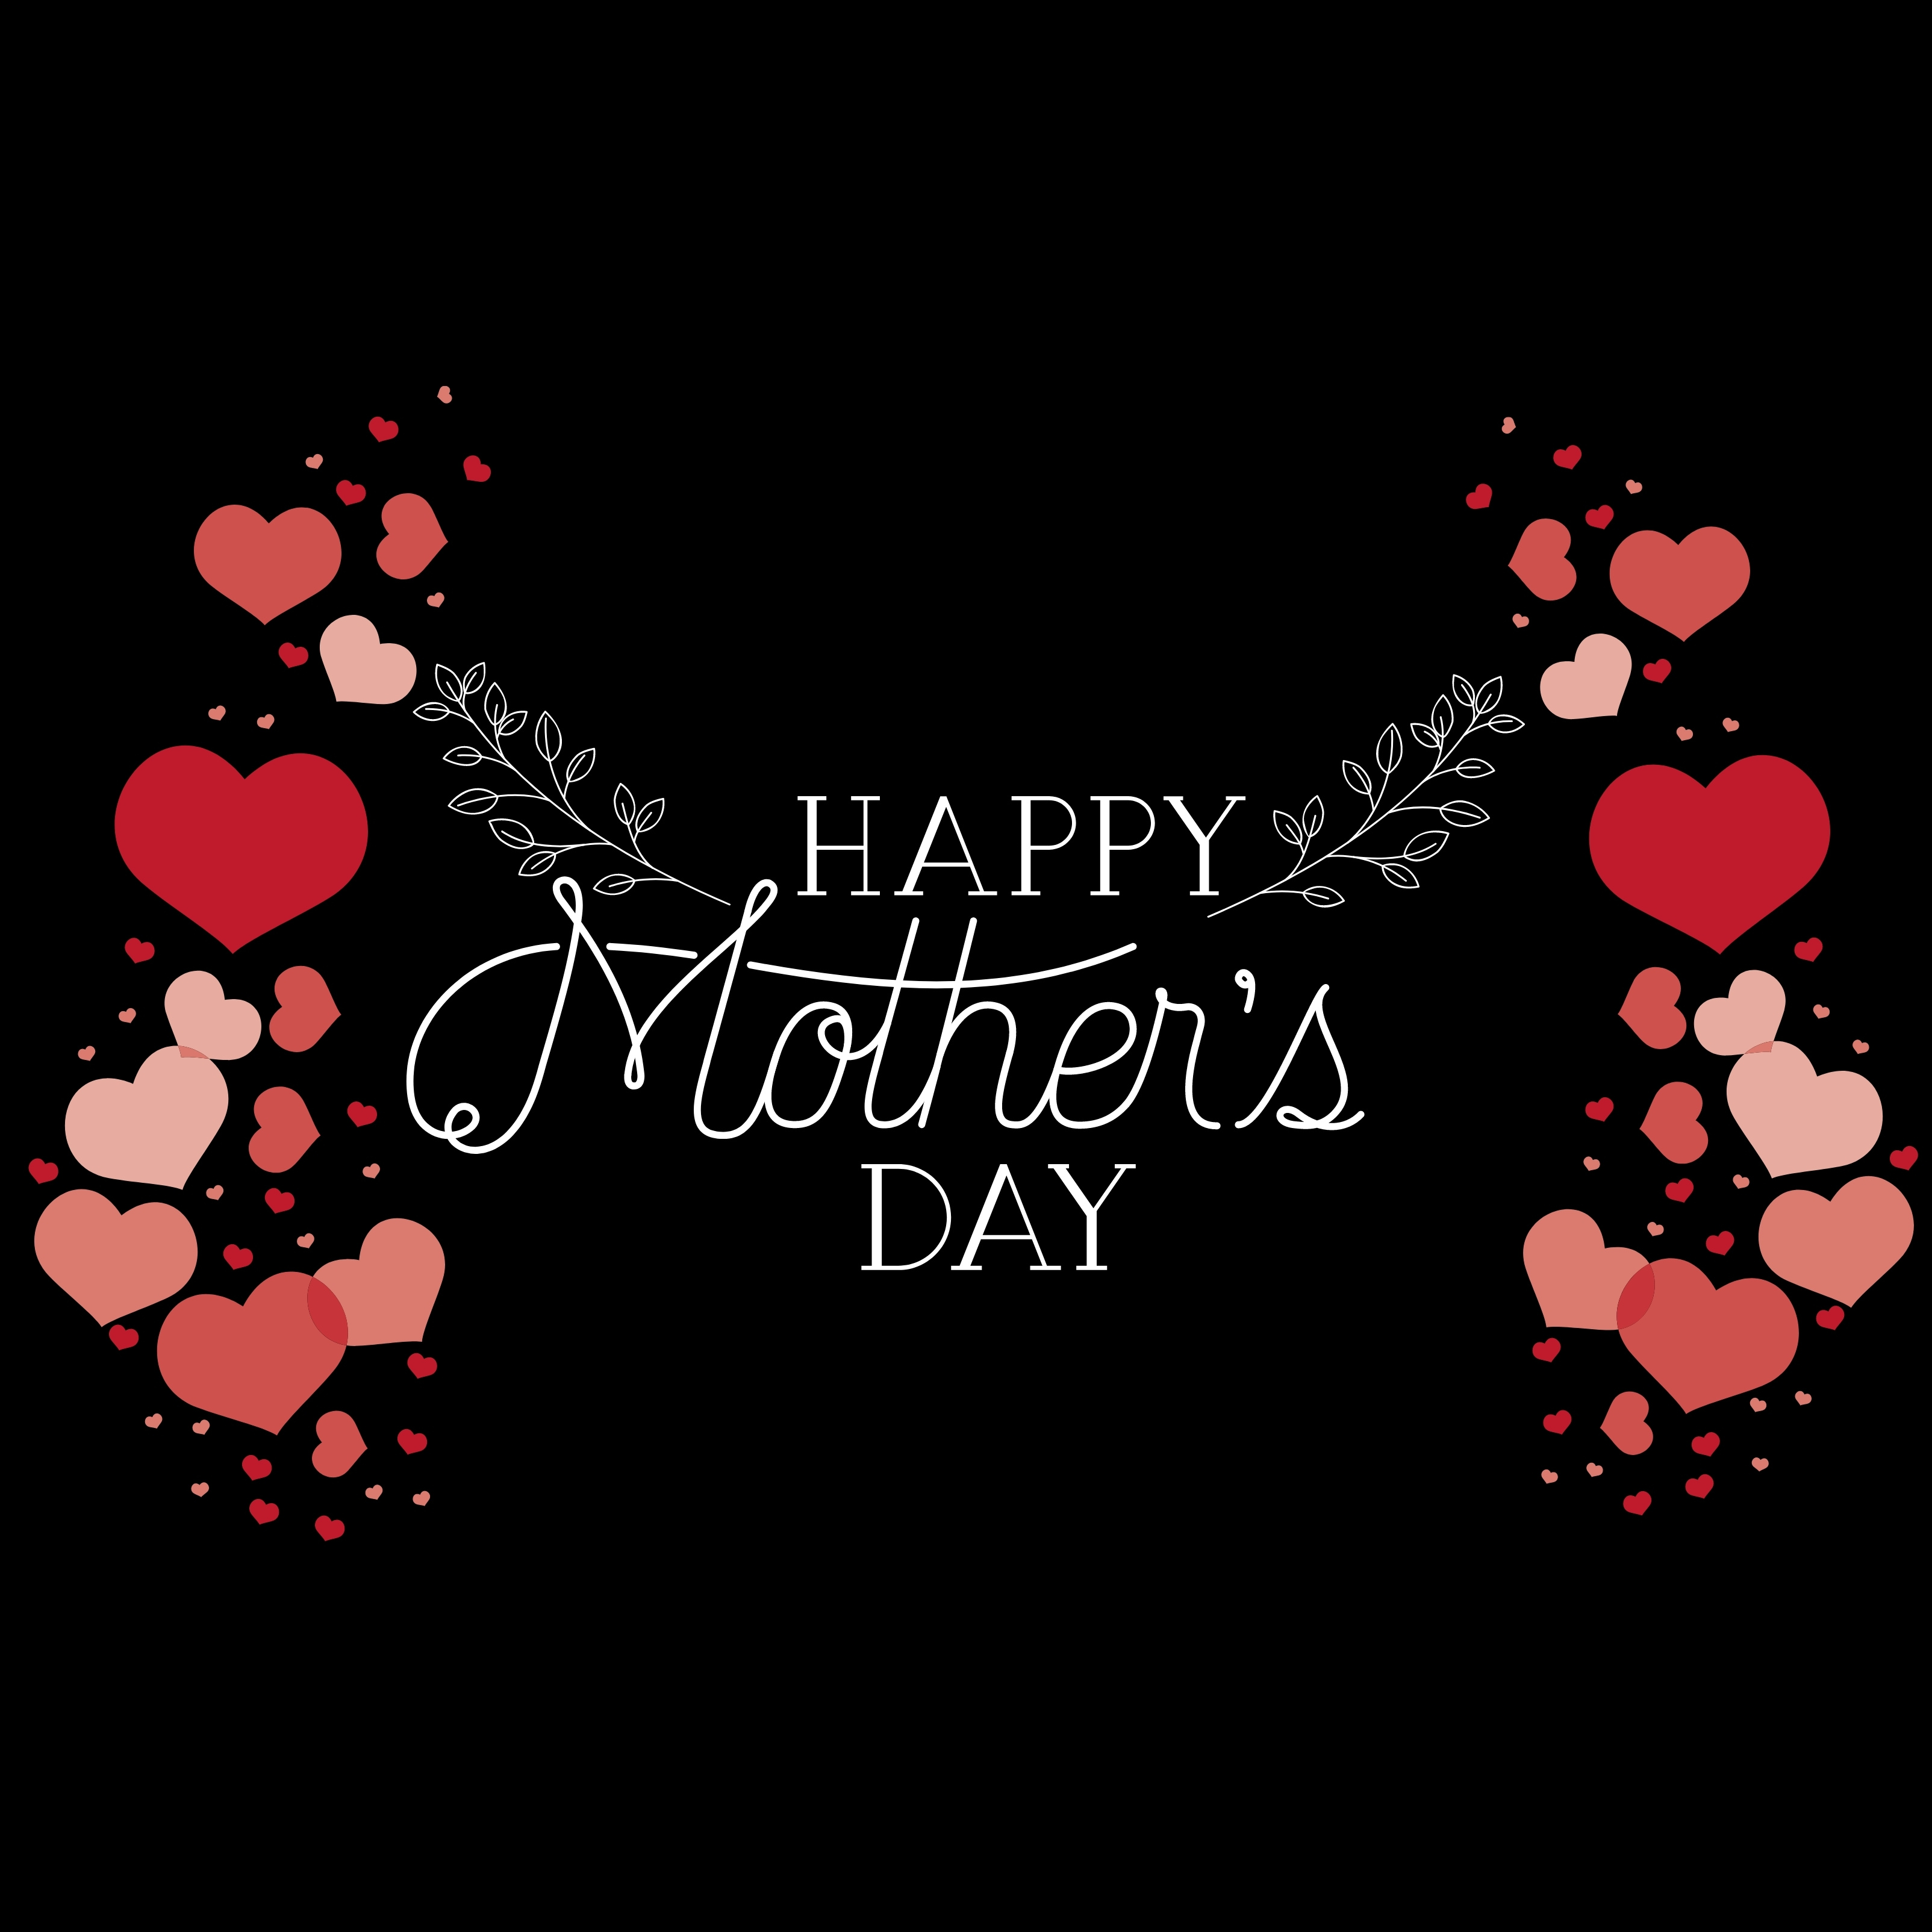 iPad Wallpapers Happy Mothers Day iPad Wallpaper 3208x3208 px